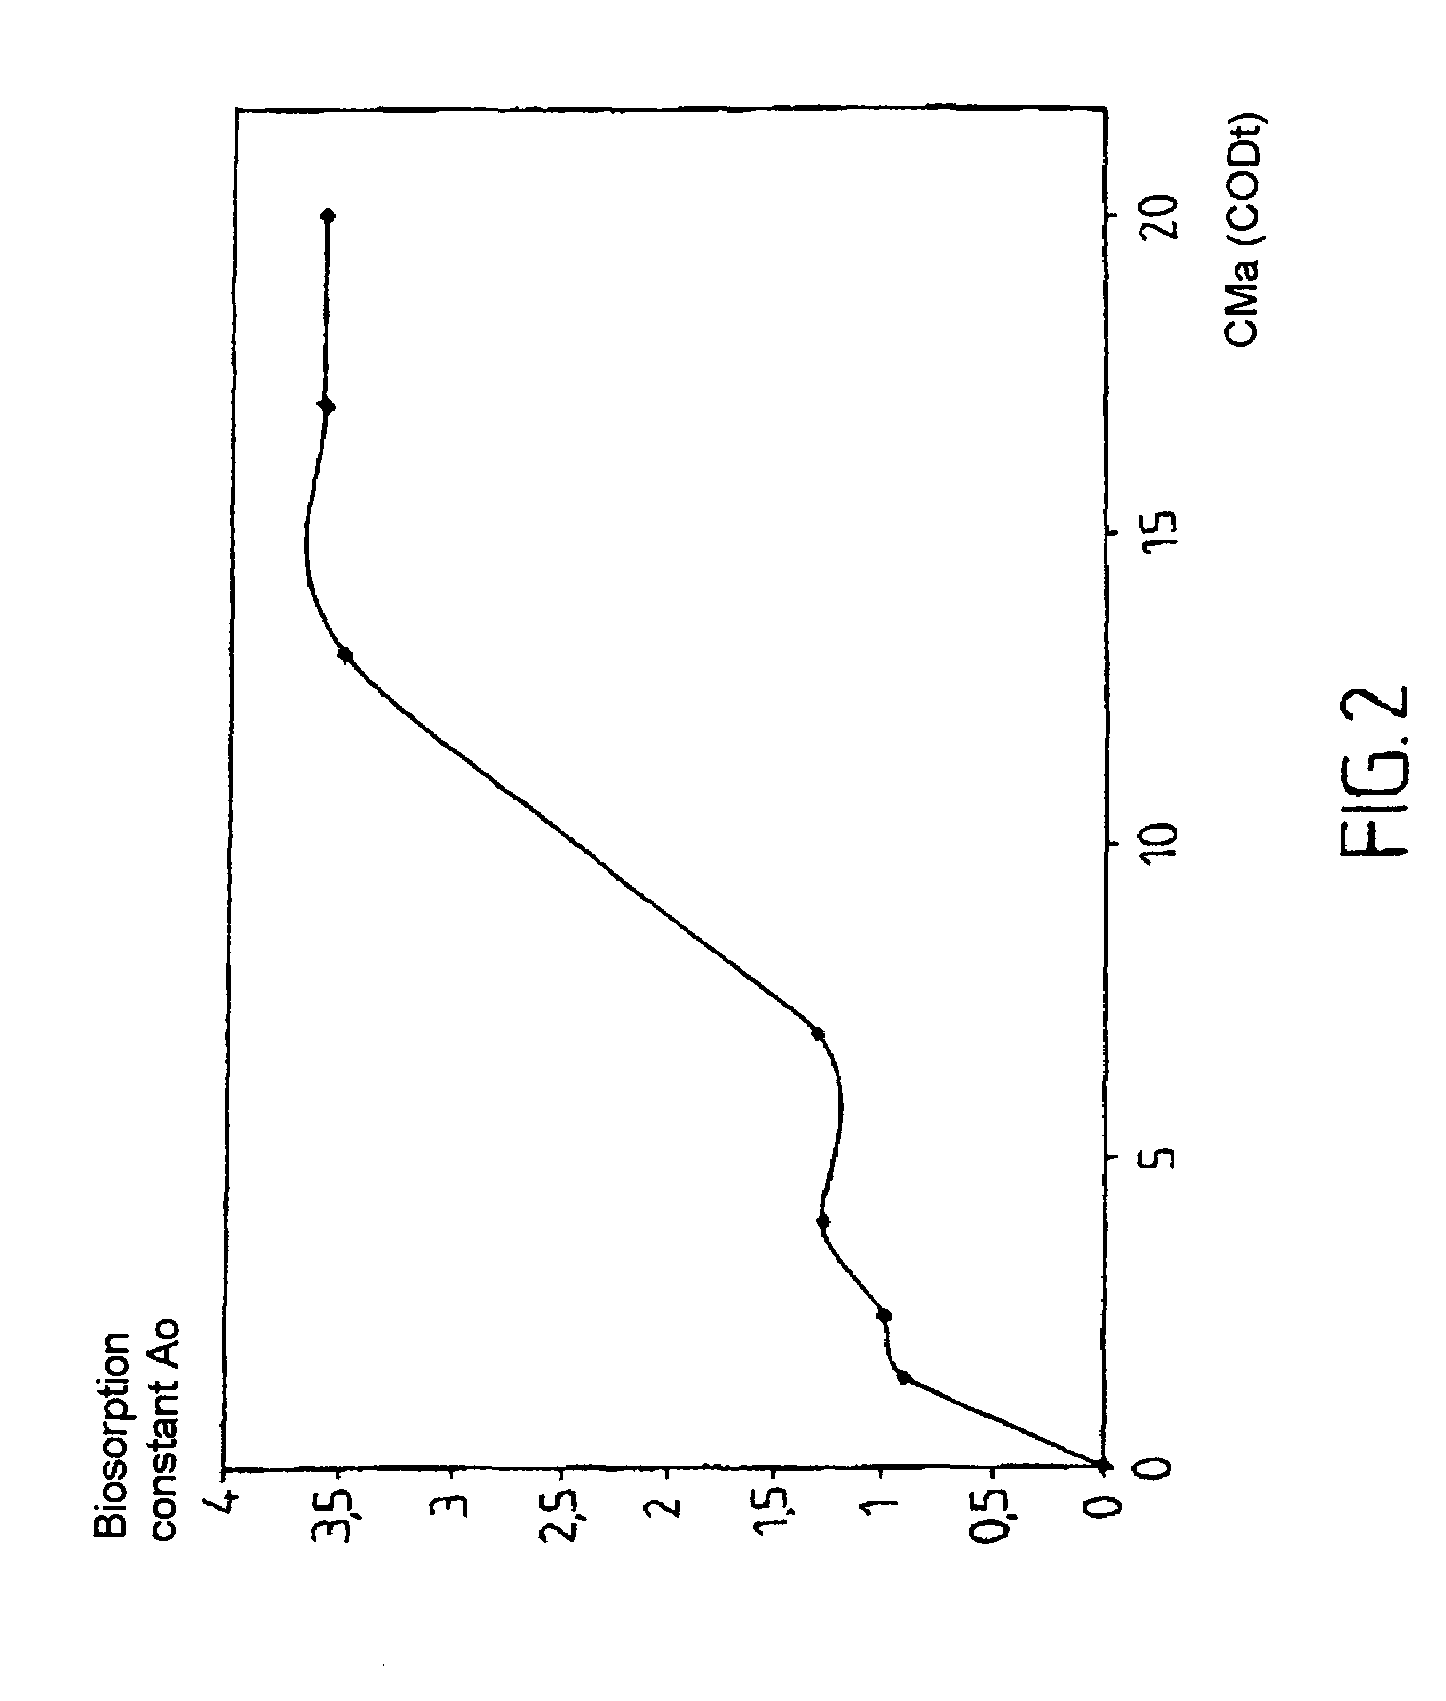 Method and plant for biological treatment of aqueous effluents for purification thereof